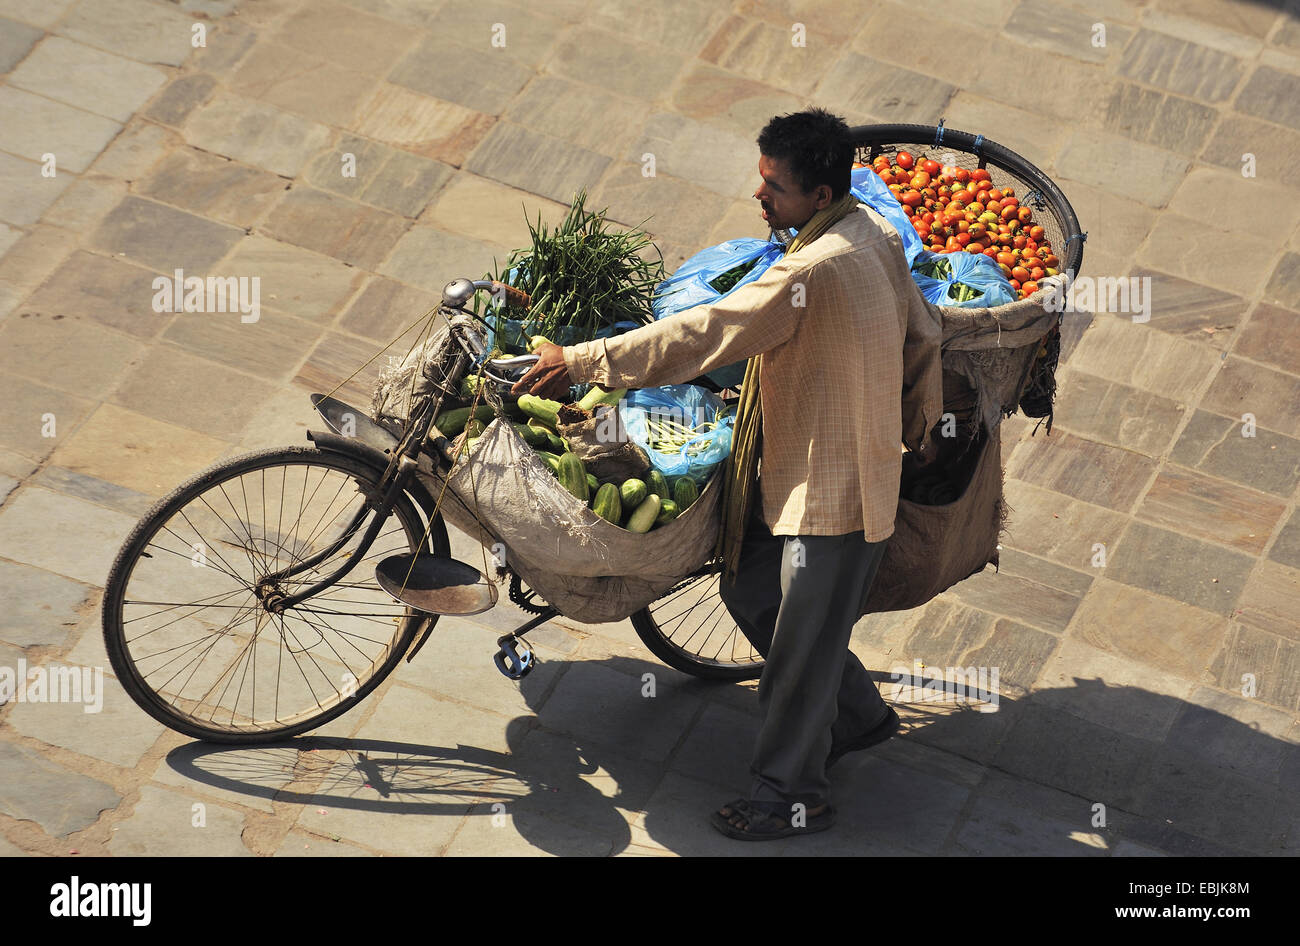 fruits and vegetables for sale in bags and a basket on bike, Nepal, Kathmandu Stock Photo